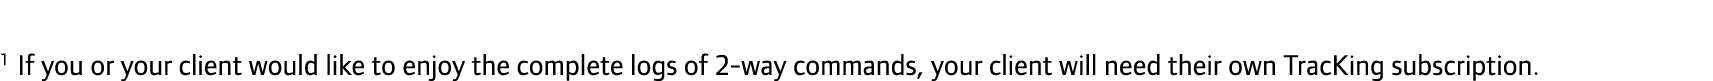 1 If you or your client would like to enjoy the complete logs of 2-way commands, your client will need their own Trac...